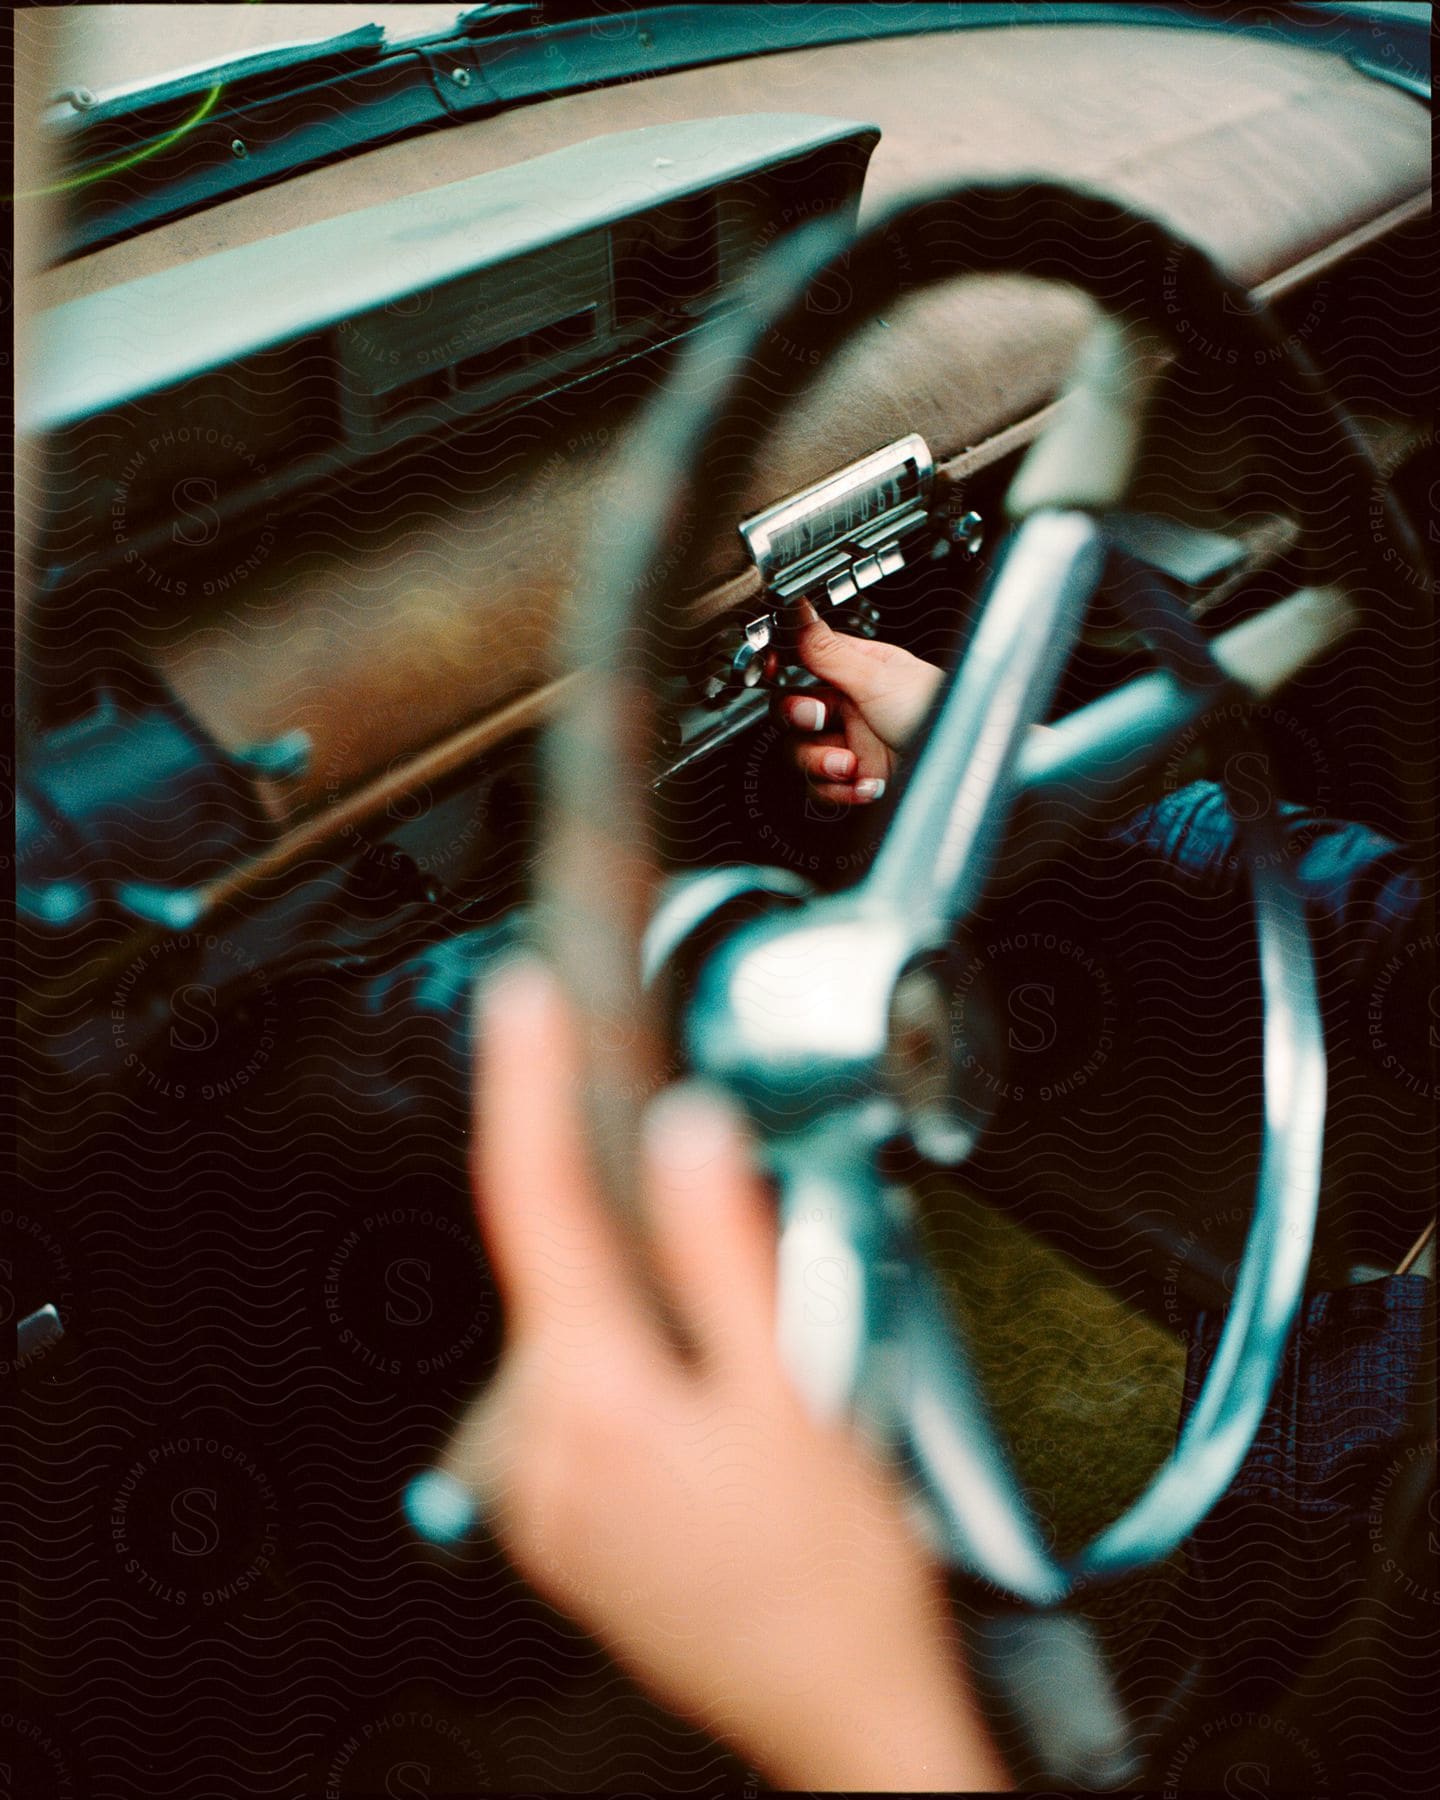 A person holding a steering wheel in a car.